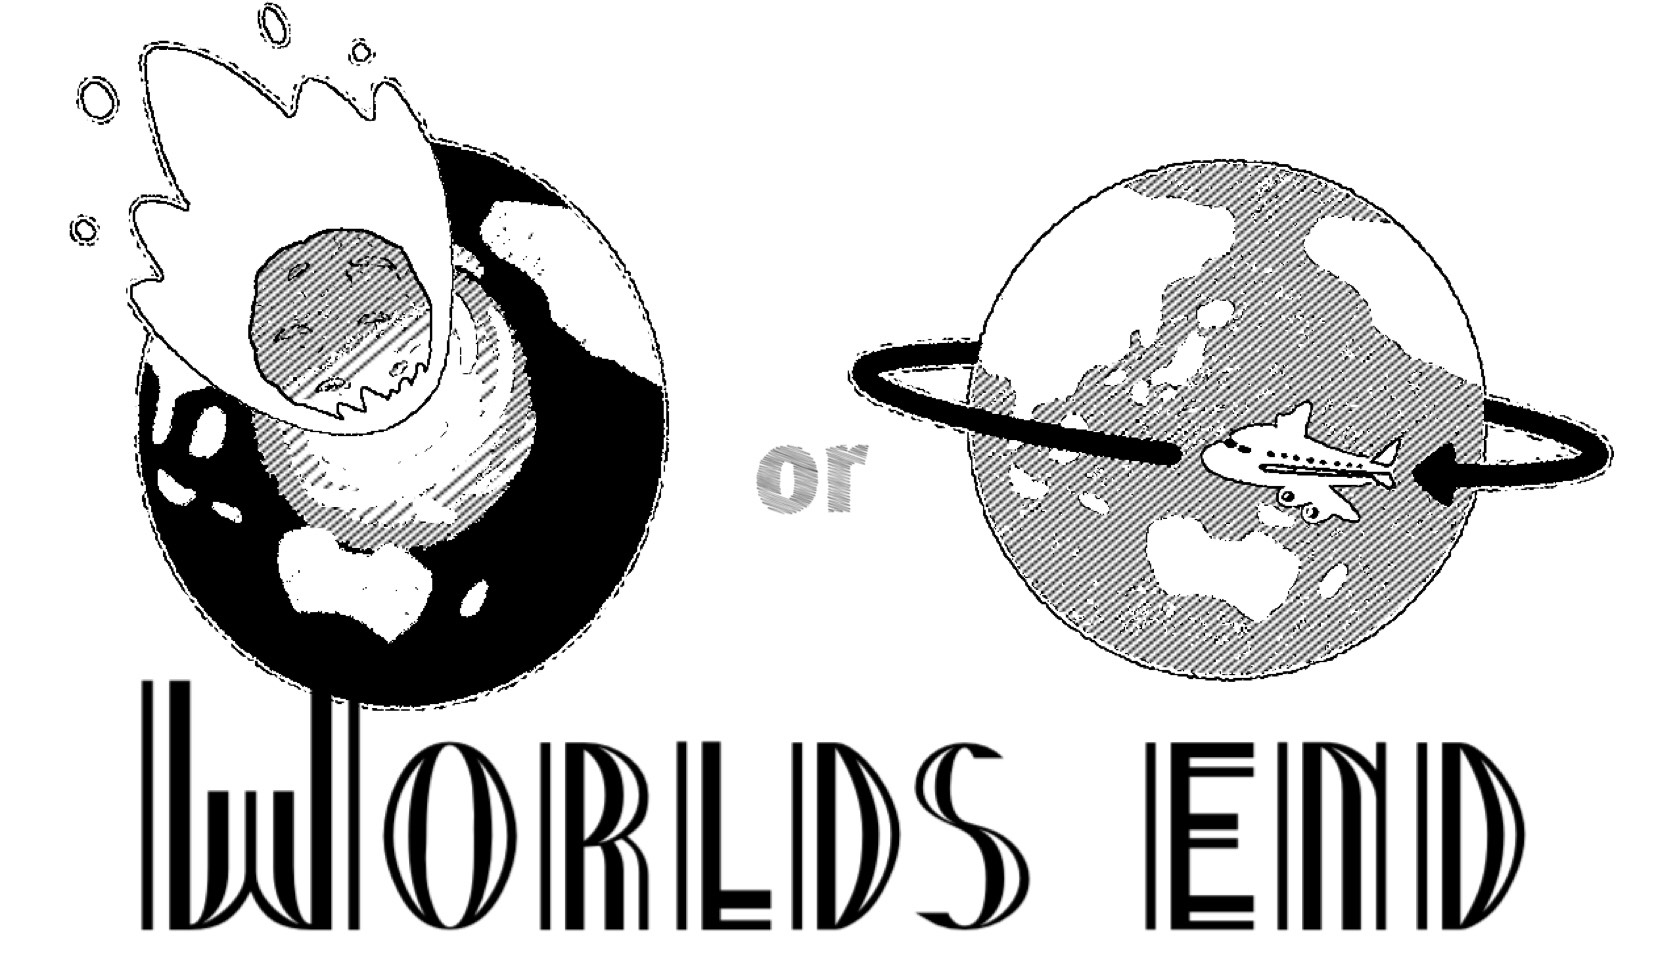 「Worlds end」のイメージ